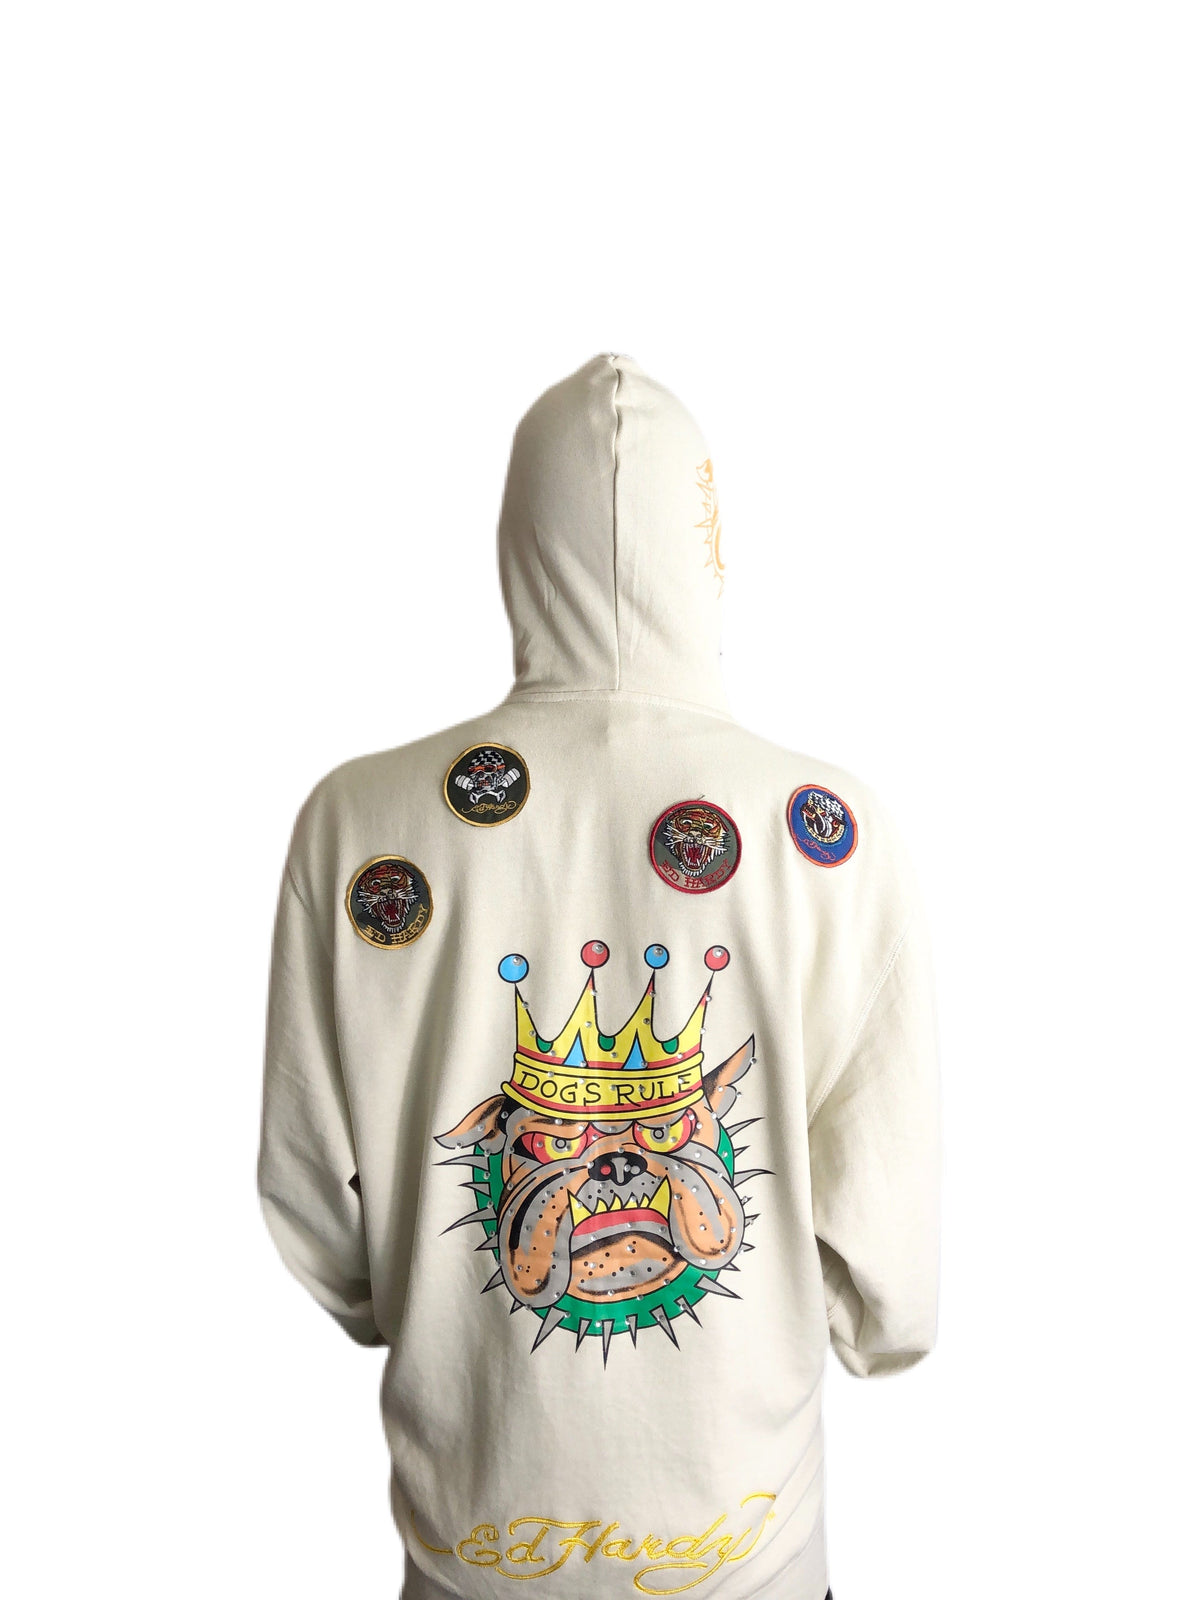 BRAND NEW WITH TAGS ED HARDY ZIP DOGS RULE HOODIE SIZE XXL - second wave vintage store